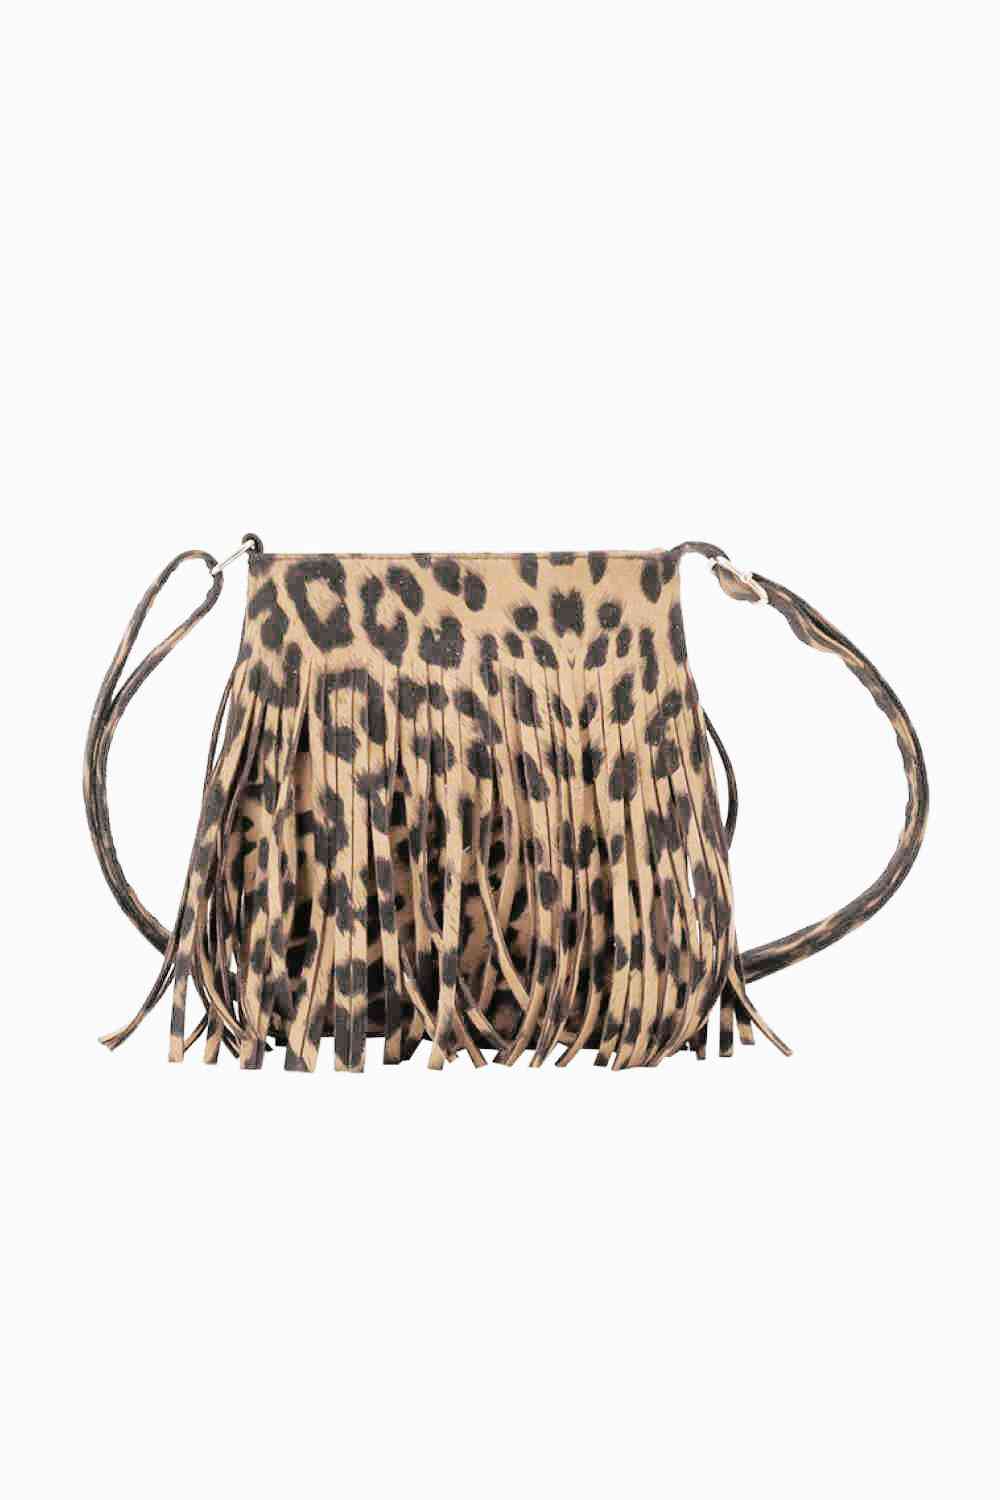 Adored PU Leather Crossbody Bag with Fringe Leopard One Size